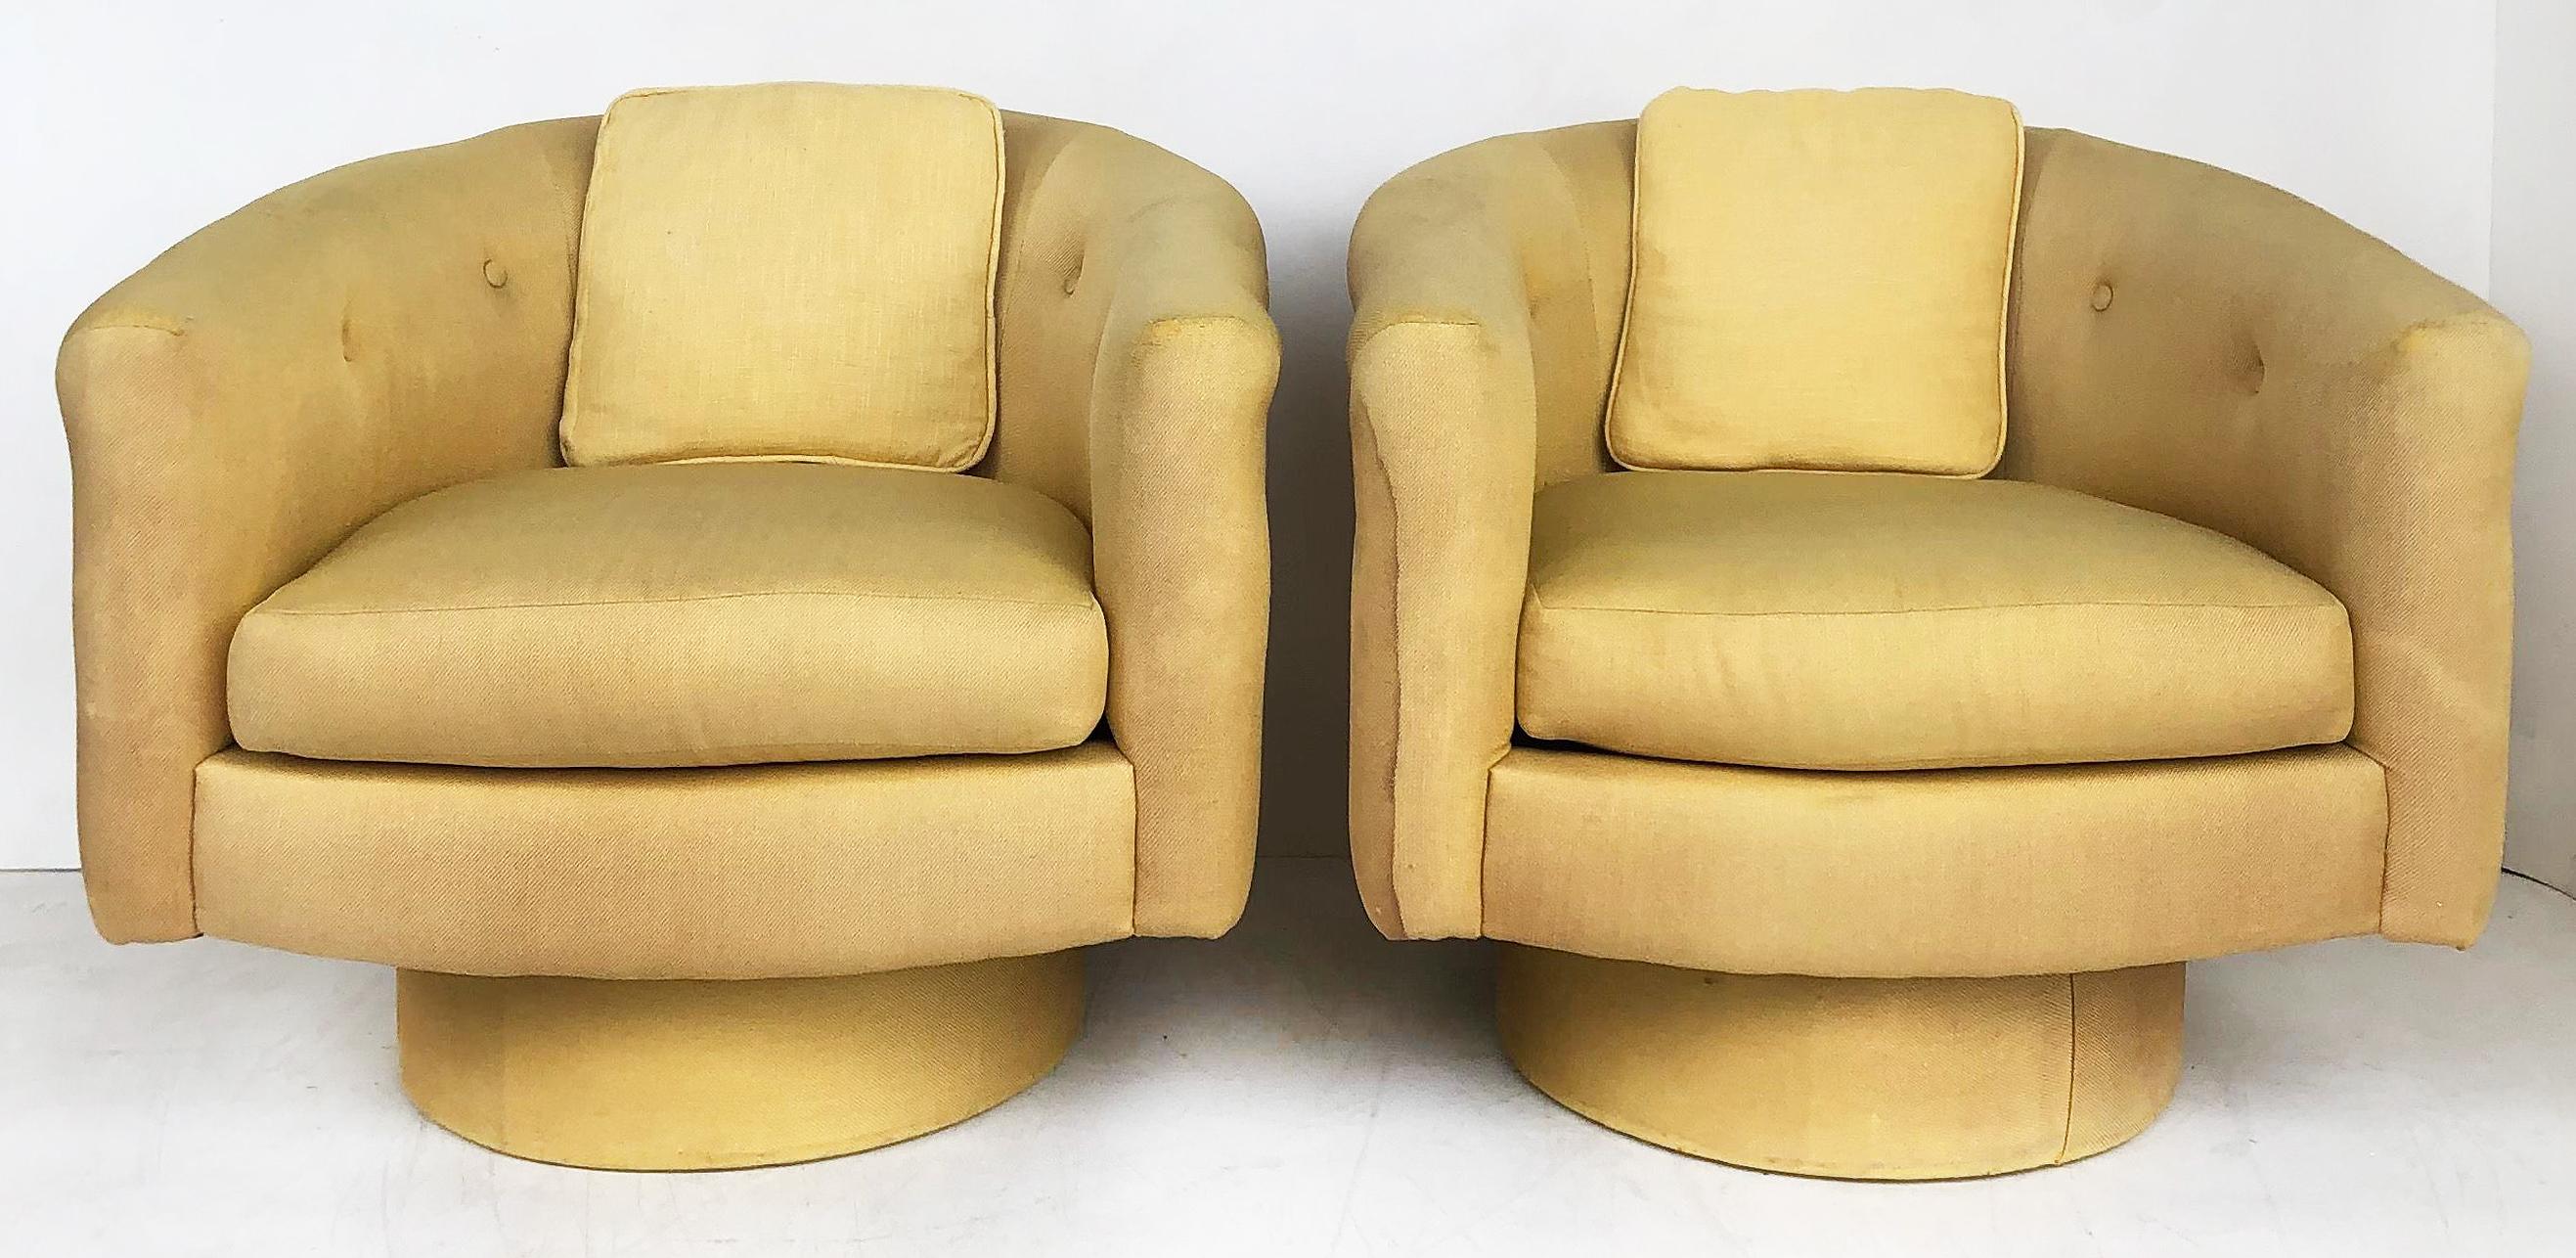 Pair of Mid-Century Modern Shawnee-Penn swivel club chairs, Designer's special pair

Offered for sale is a pair of Mid-Century Modern upholstered swivel chairs manufactured by Shawnee-Penn of Bethlehem, PA, and Los Angeles, CA. This stylish pair